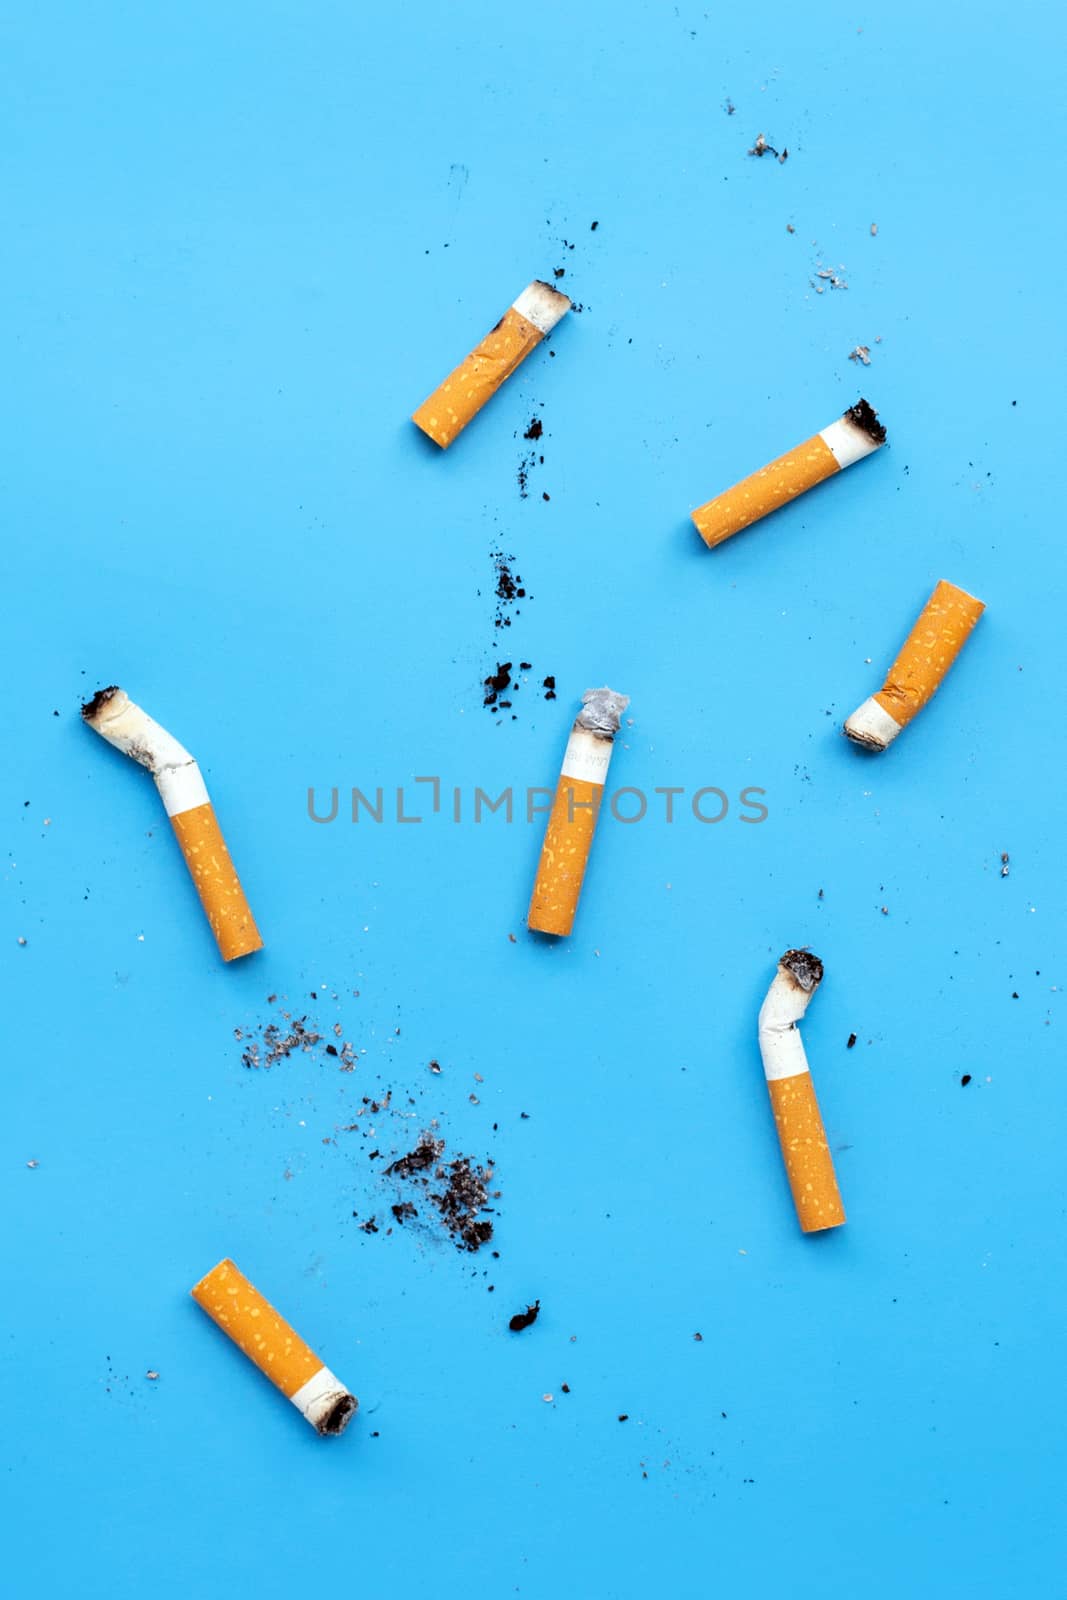 Cigarette butts on blue background.  by Bowonpat